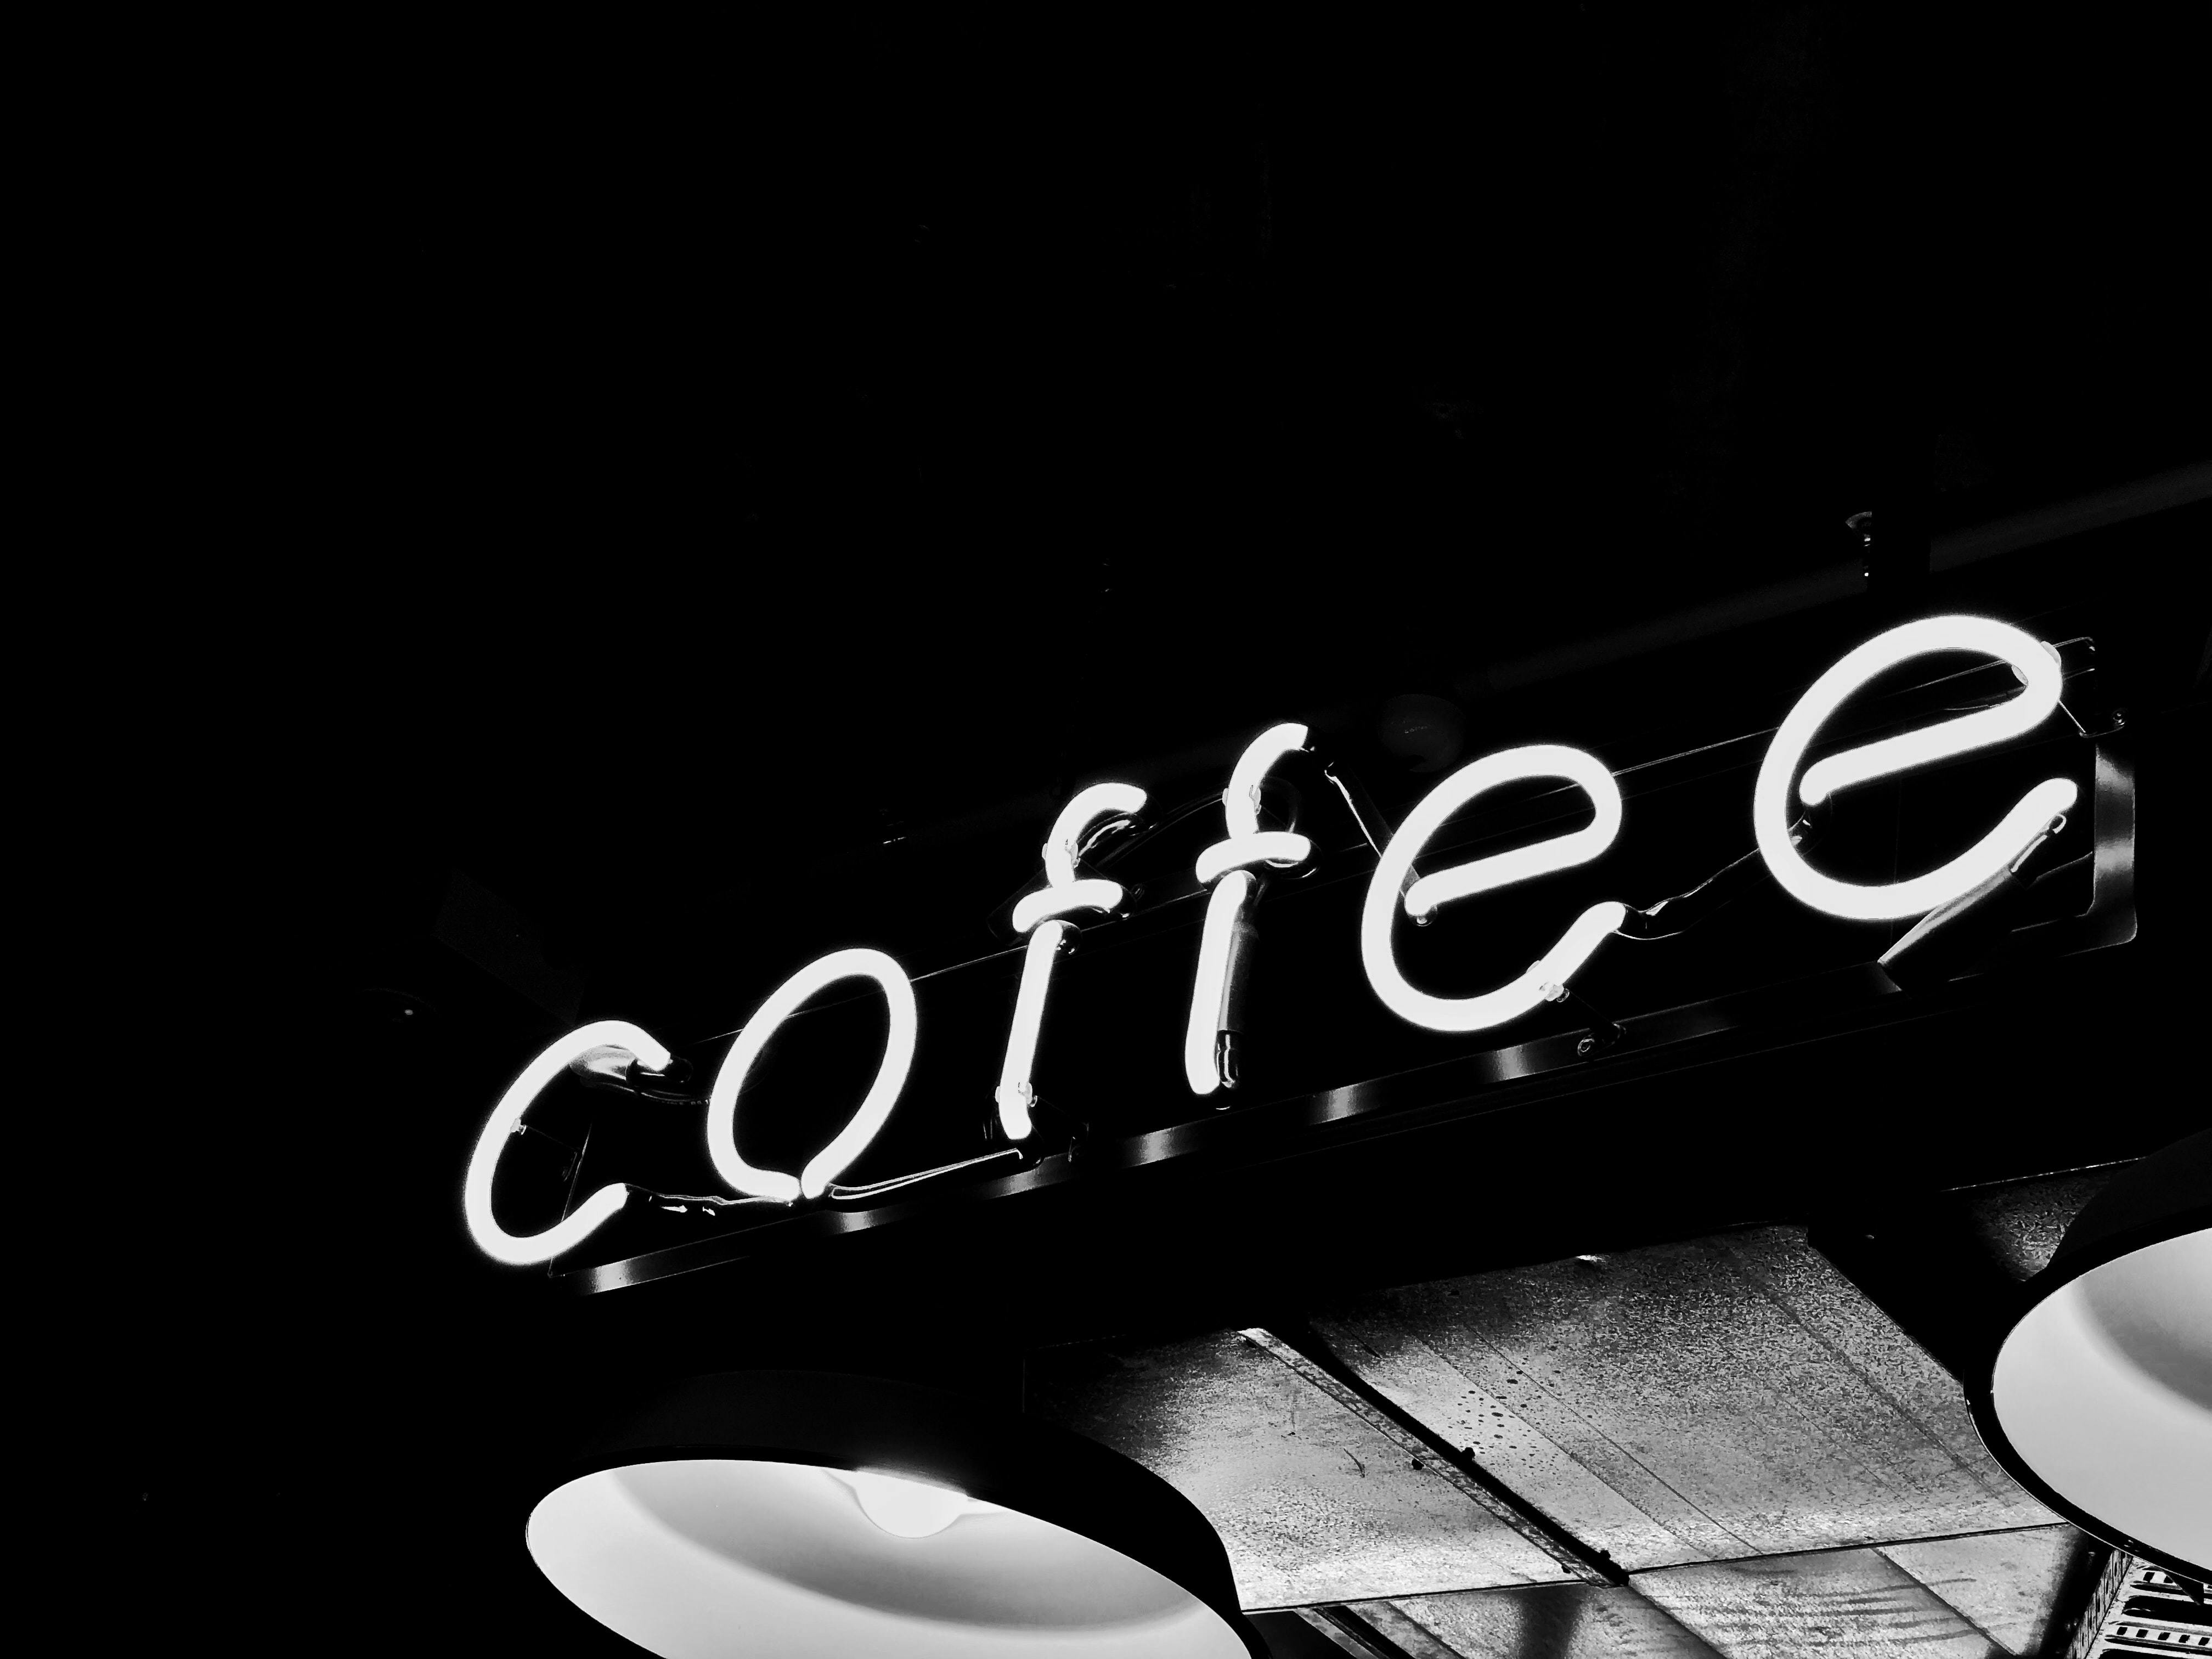 Coffee shops for work in Perth